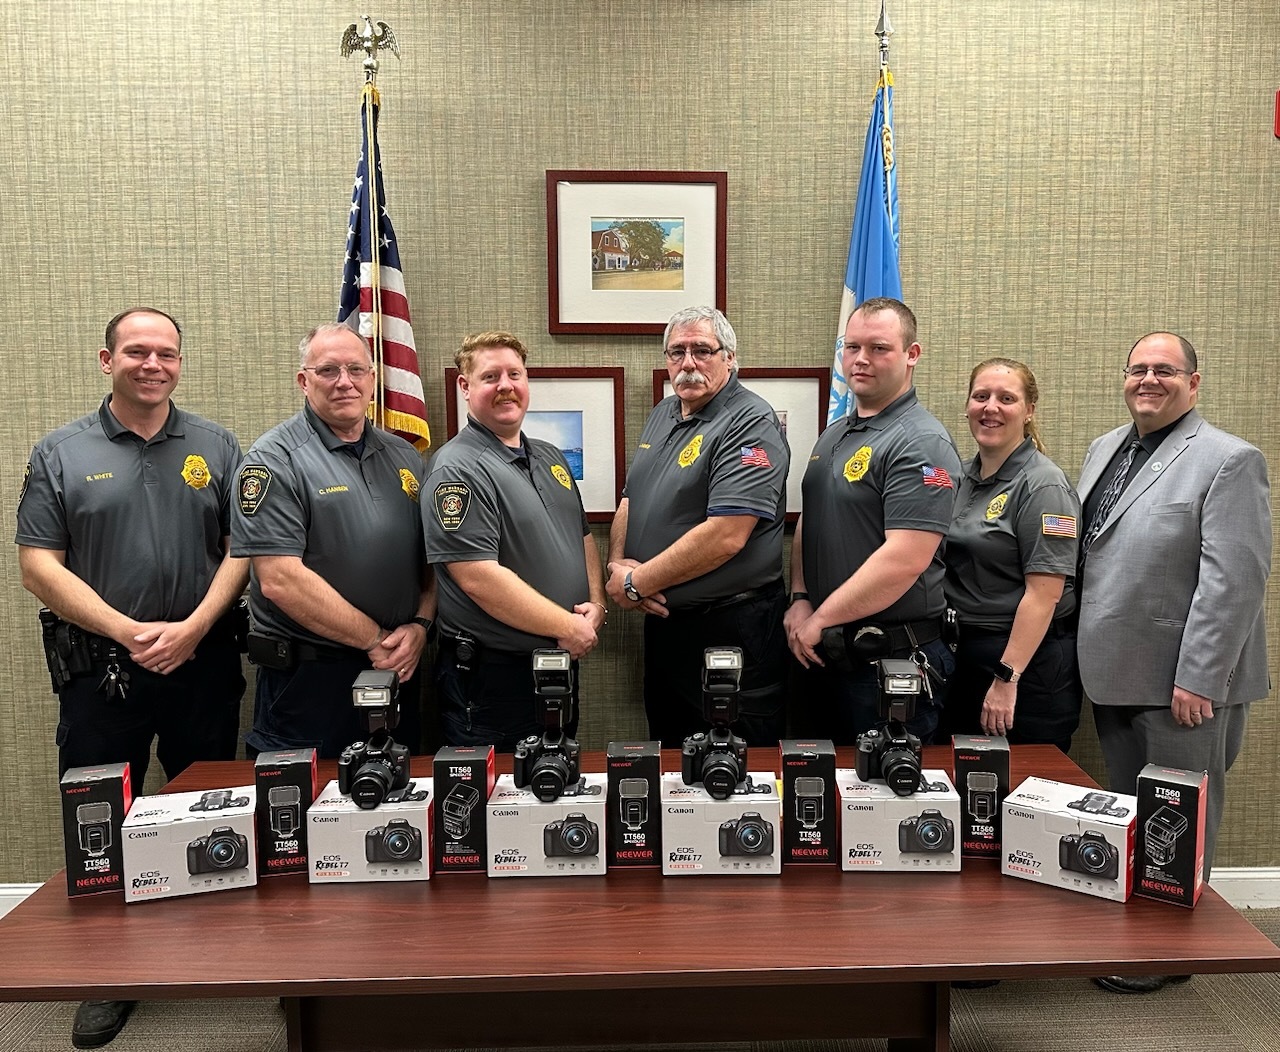 (L to R) Fire Marshal Ryan White, Senior Fire Marshal Chris Hansen, Fire Marshal Liam Keating, Chief Fire Marshal John Rankin, Fire Marshal Shane Sharkey, Fire Marshal Courtney Idtensohn, and Public Safety Administrator Ryan Murphy herald grant they used to purchase new camera kits for the fire marshals to utilize for documenting inspections and investigations.